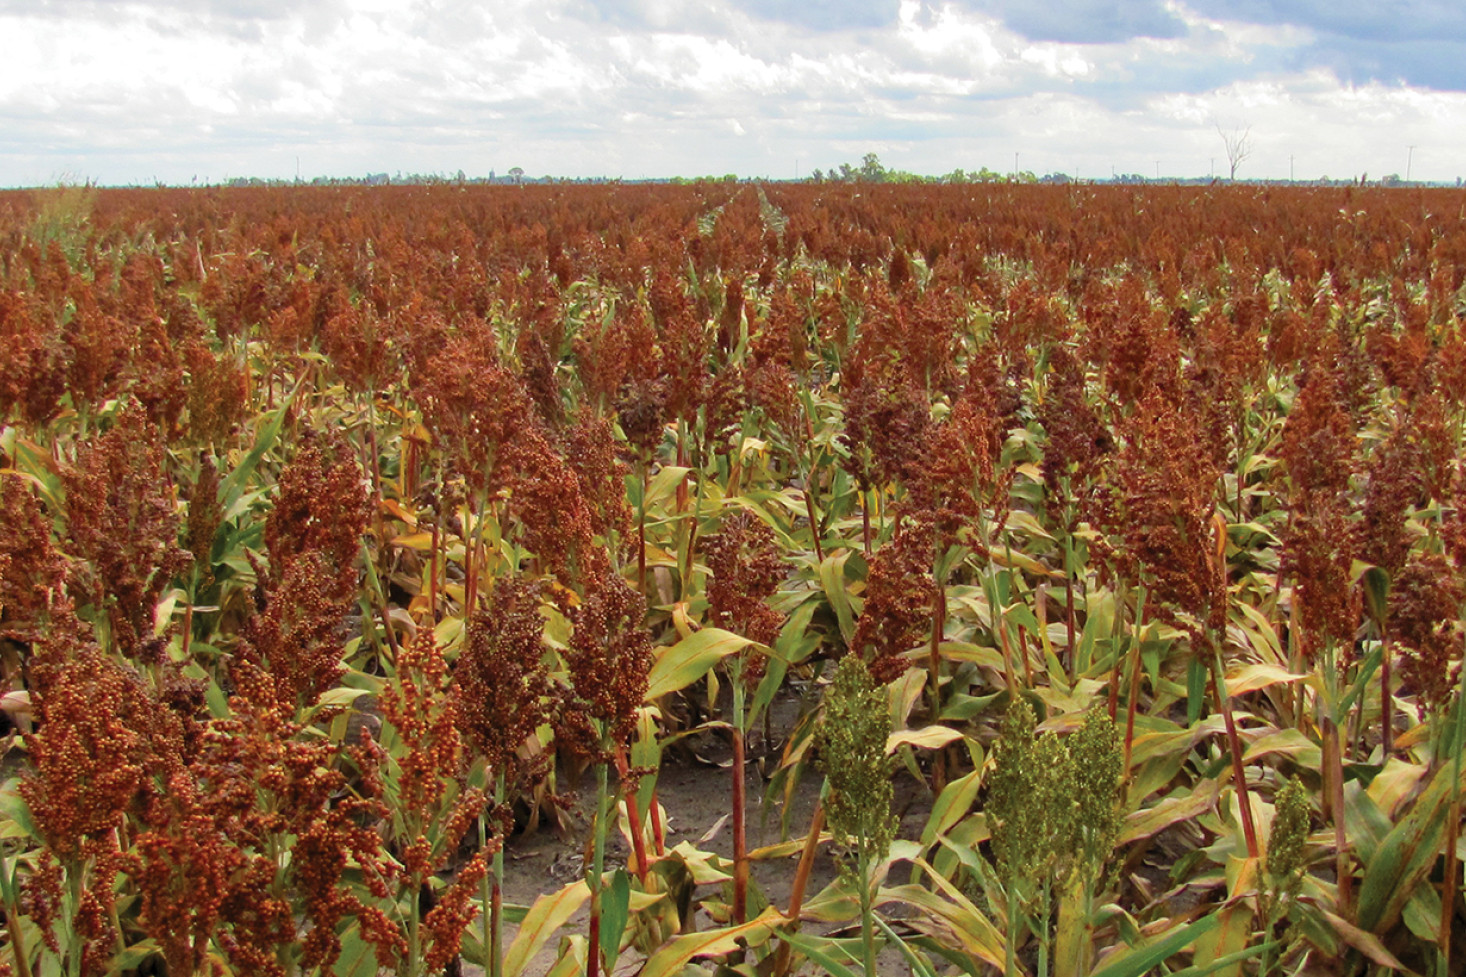 There is concern over the result of sorghum crops locally after recent rain events threatened significant downgrading.